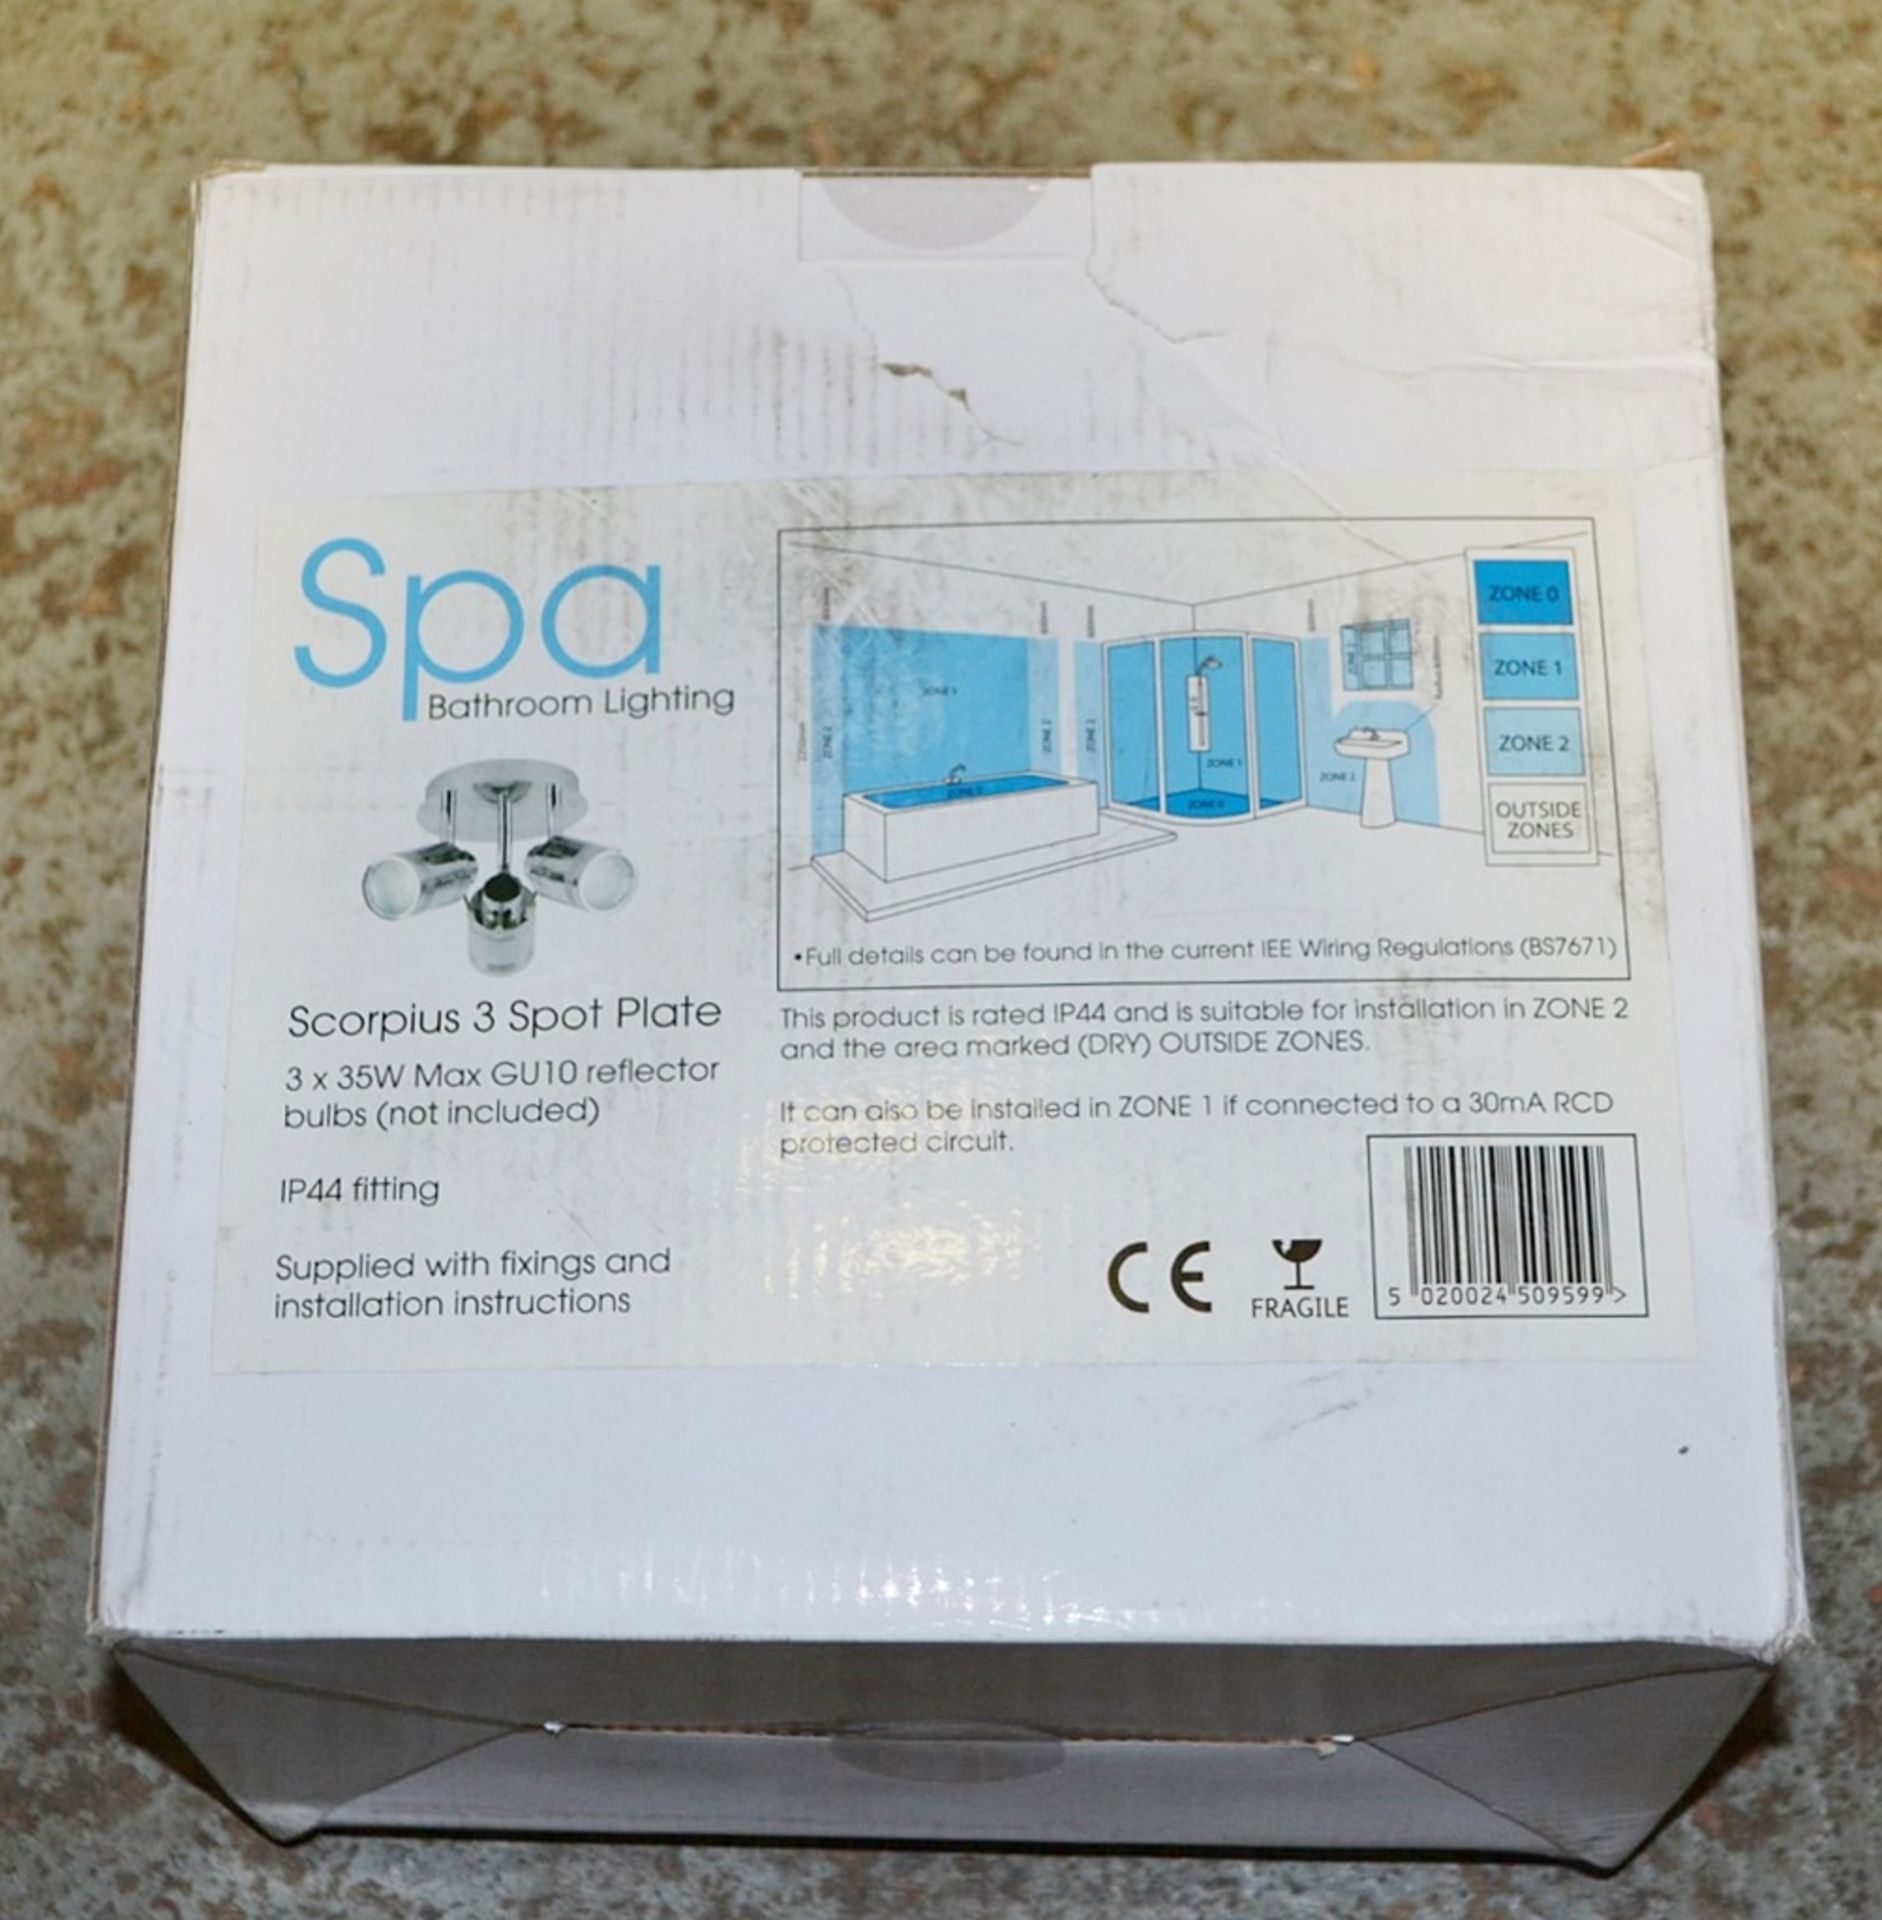 1 x Spa Bathroom Lighting Scorpius 3 Spot Plate - Brand New and Boxed - Ref: P - CL323 - Location: A - Image 2 of 2